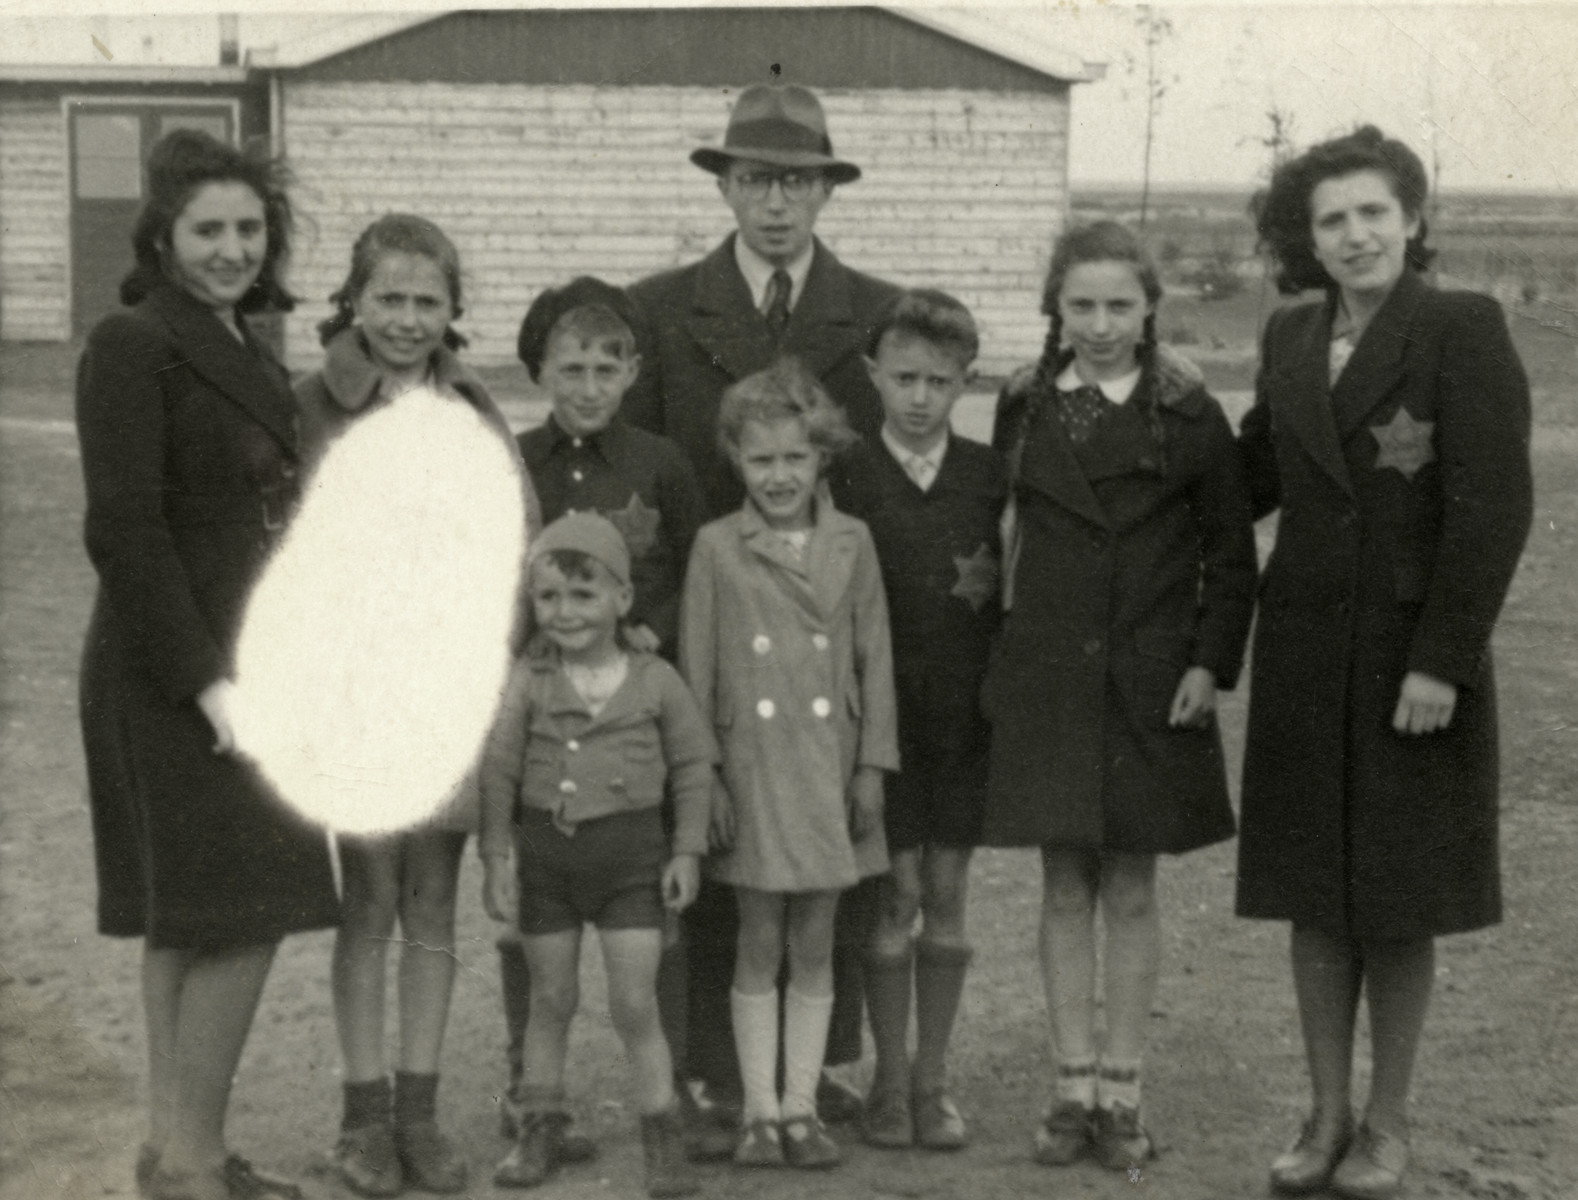 Portrait of the Birnbaum family in the Westerbork transit camp wearing Jewish stars on the street where they lived.

From left to right are an unidentified woman, Regina, Yaakov, Shmuel, Yehoshua, Suzy, Tzvi, Sonni and Regina Ohringer (a first  cousin who perished in Sobibor in 1943 at the age of 16).